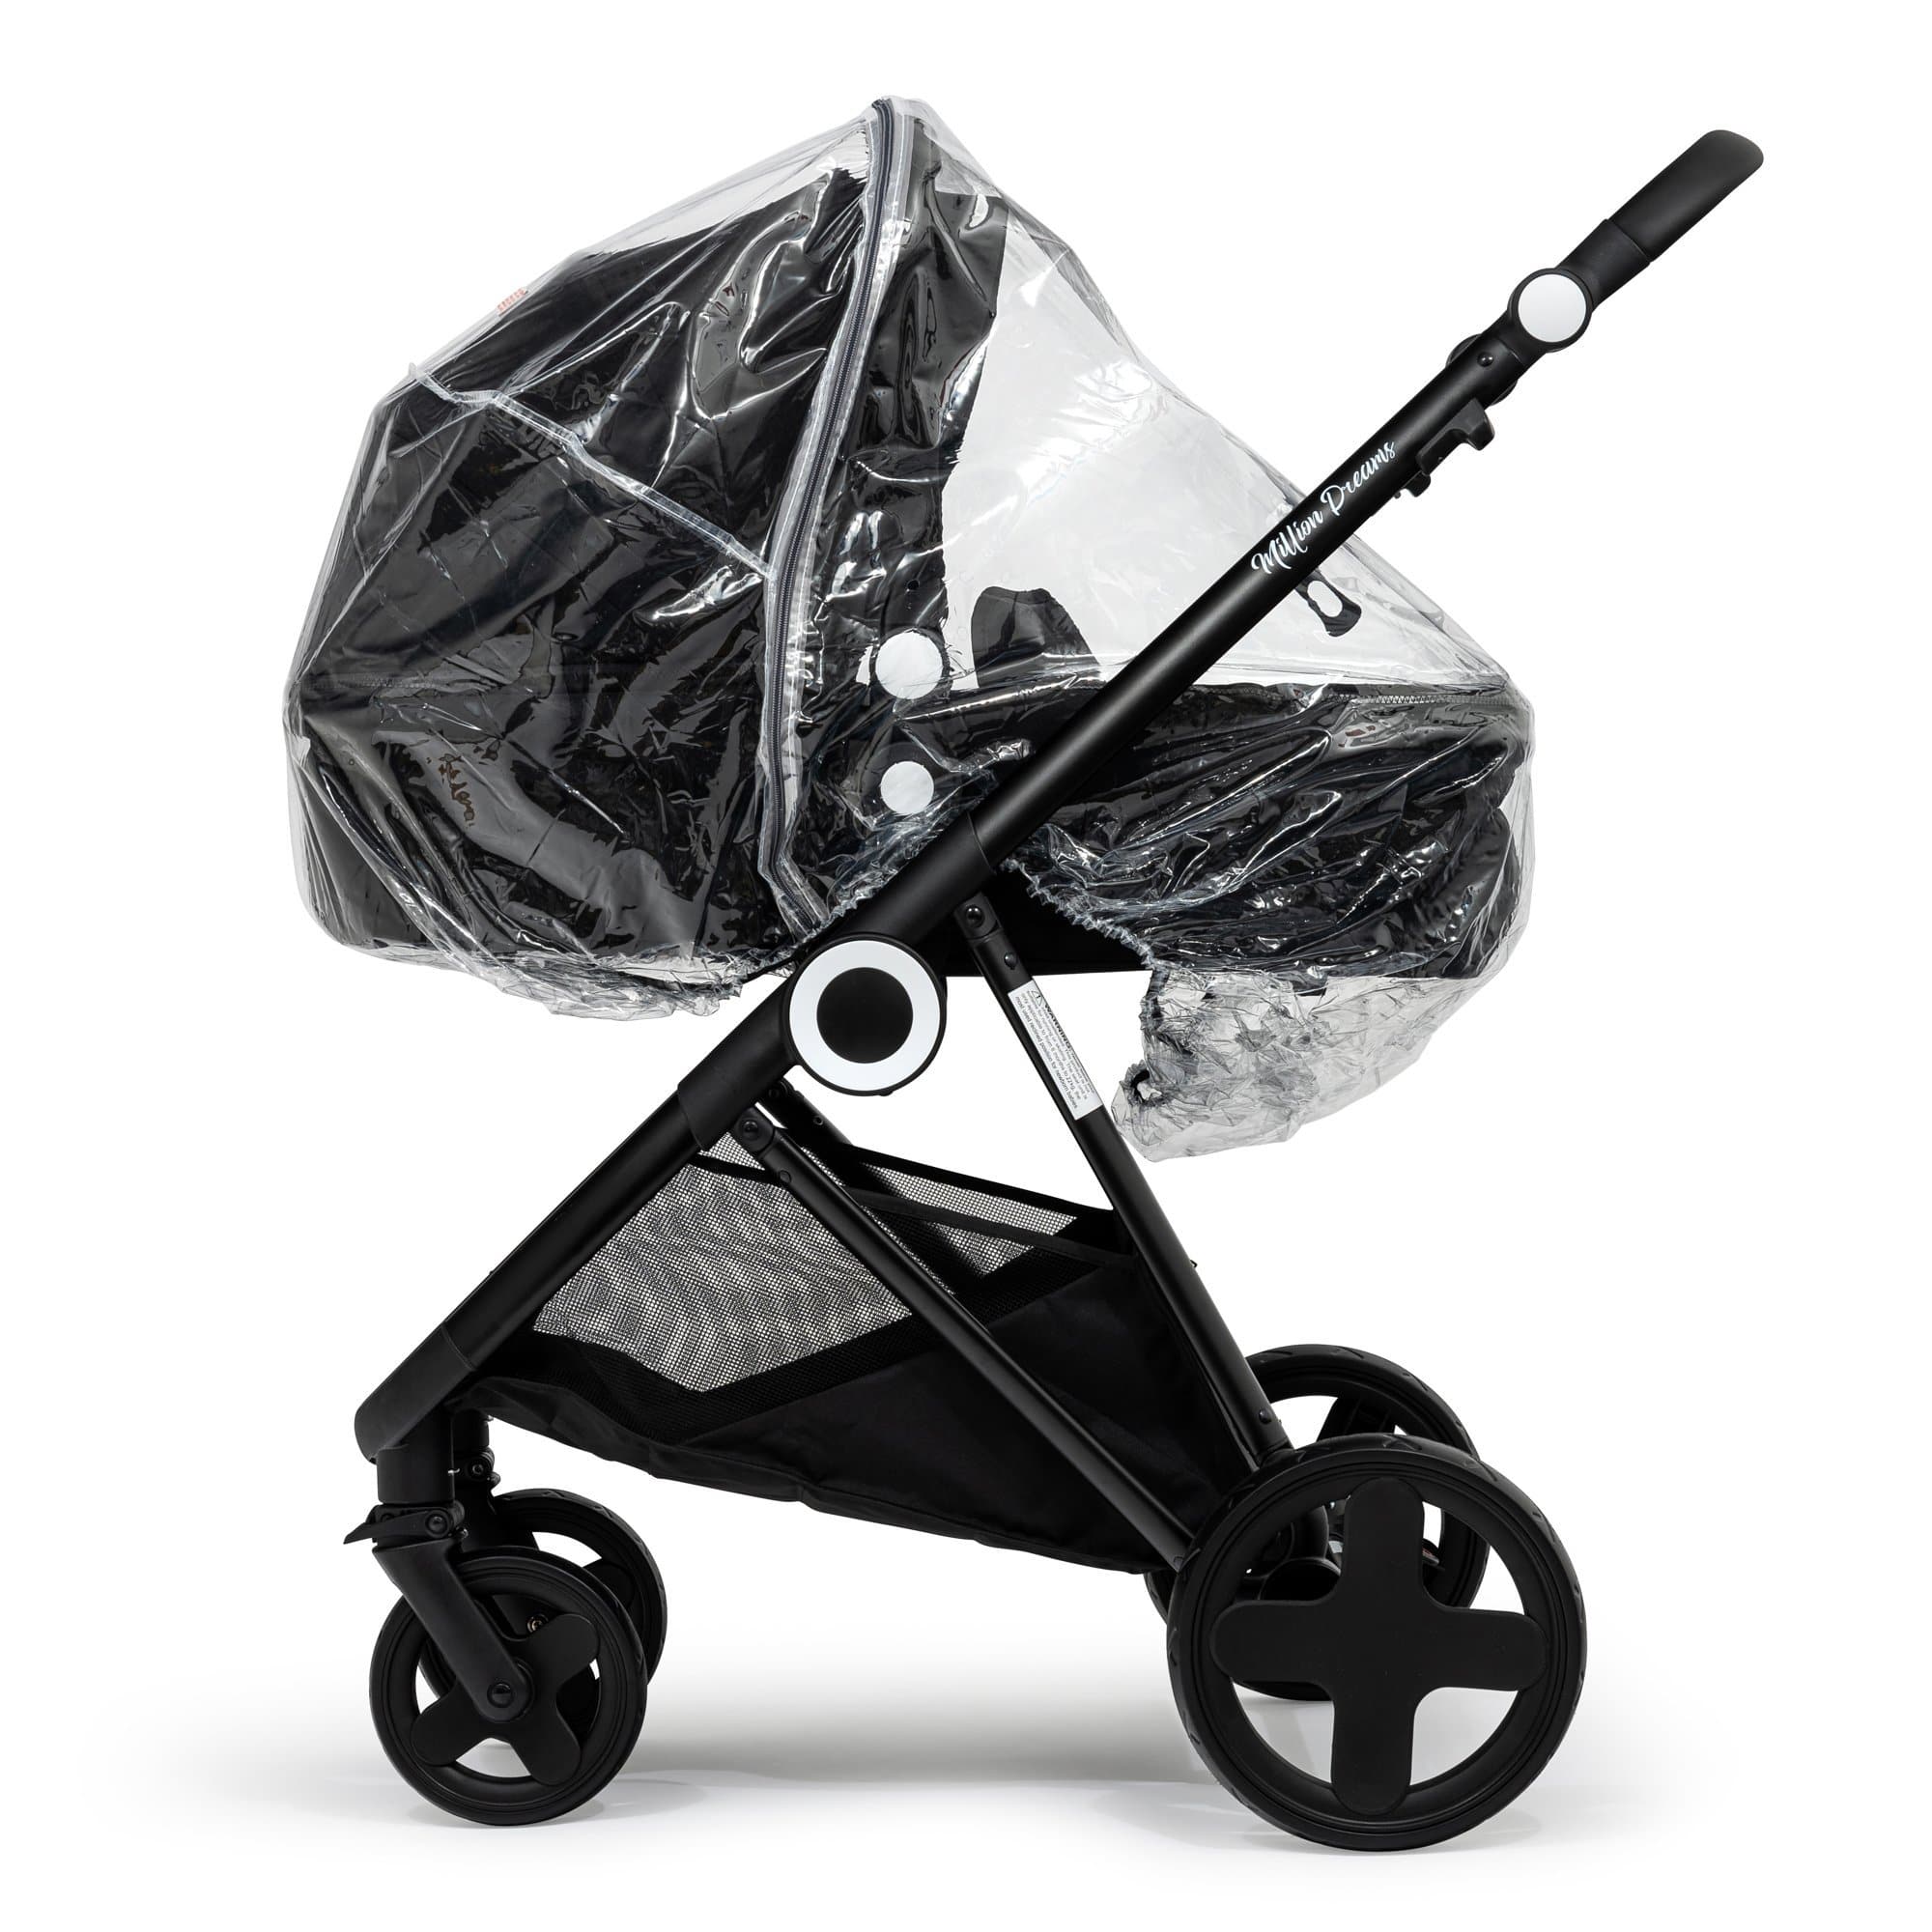 2 in 1 Rain Cover Compatible with Zooper - Fits All Models - For Your Little One